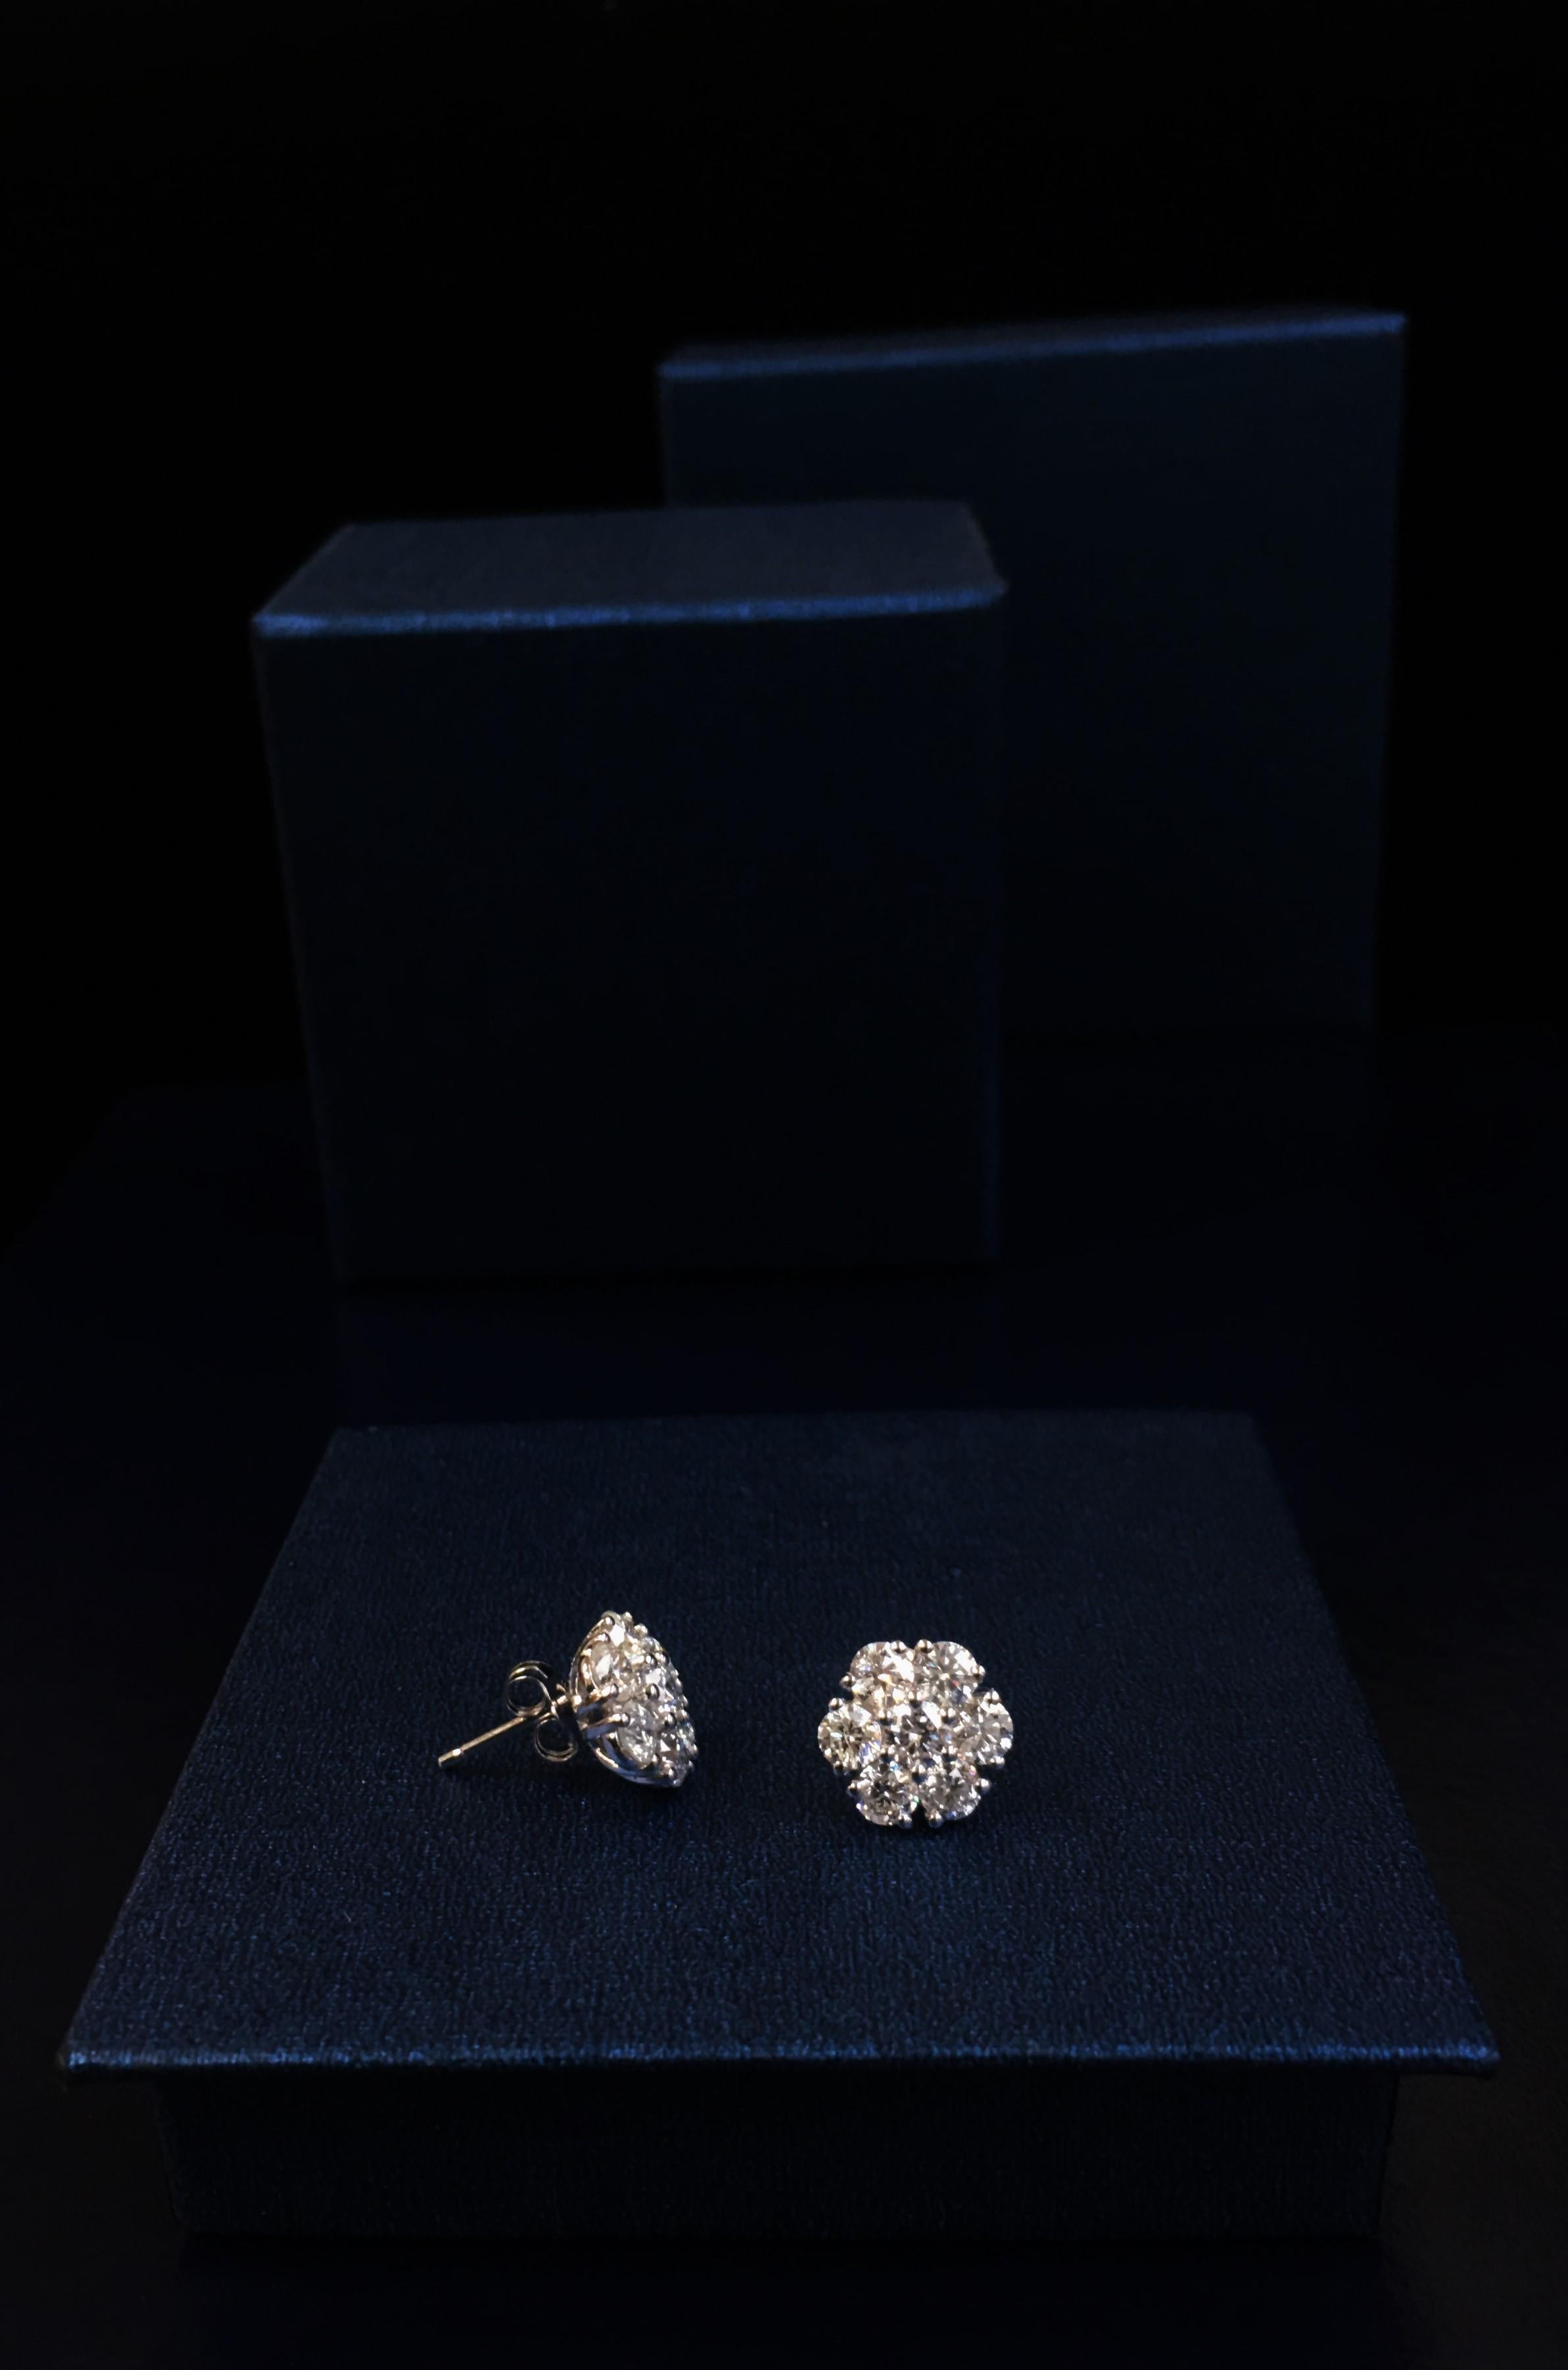 18 karat white gold cluster diamond earrings feature 2.50 cts round brilliant cut diamonds

This product comes with a certificate of appraisal
This product will be packaged in a custom box

Composition:
18kt white gold
 2.50 cts diamonds